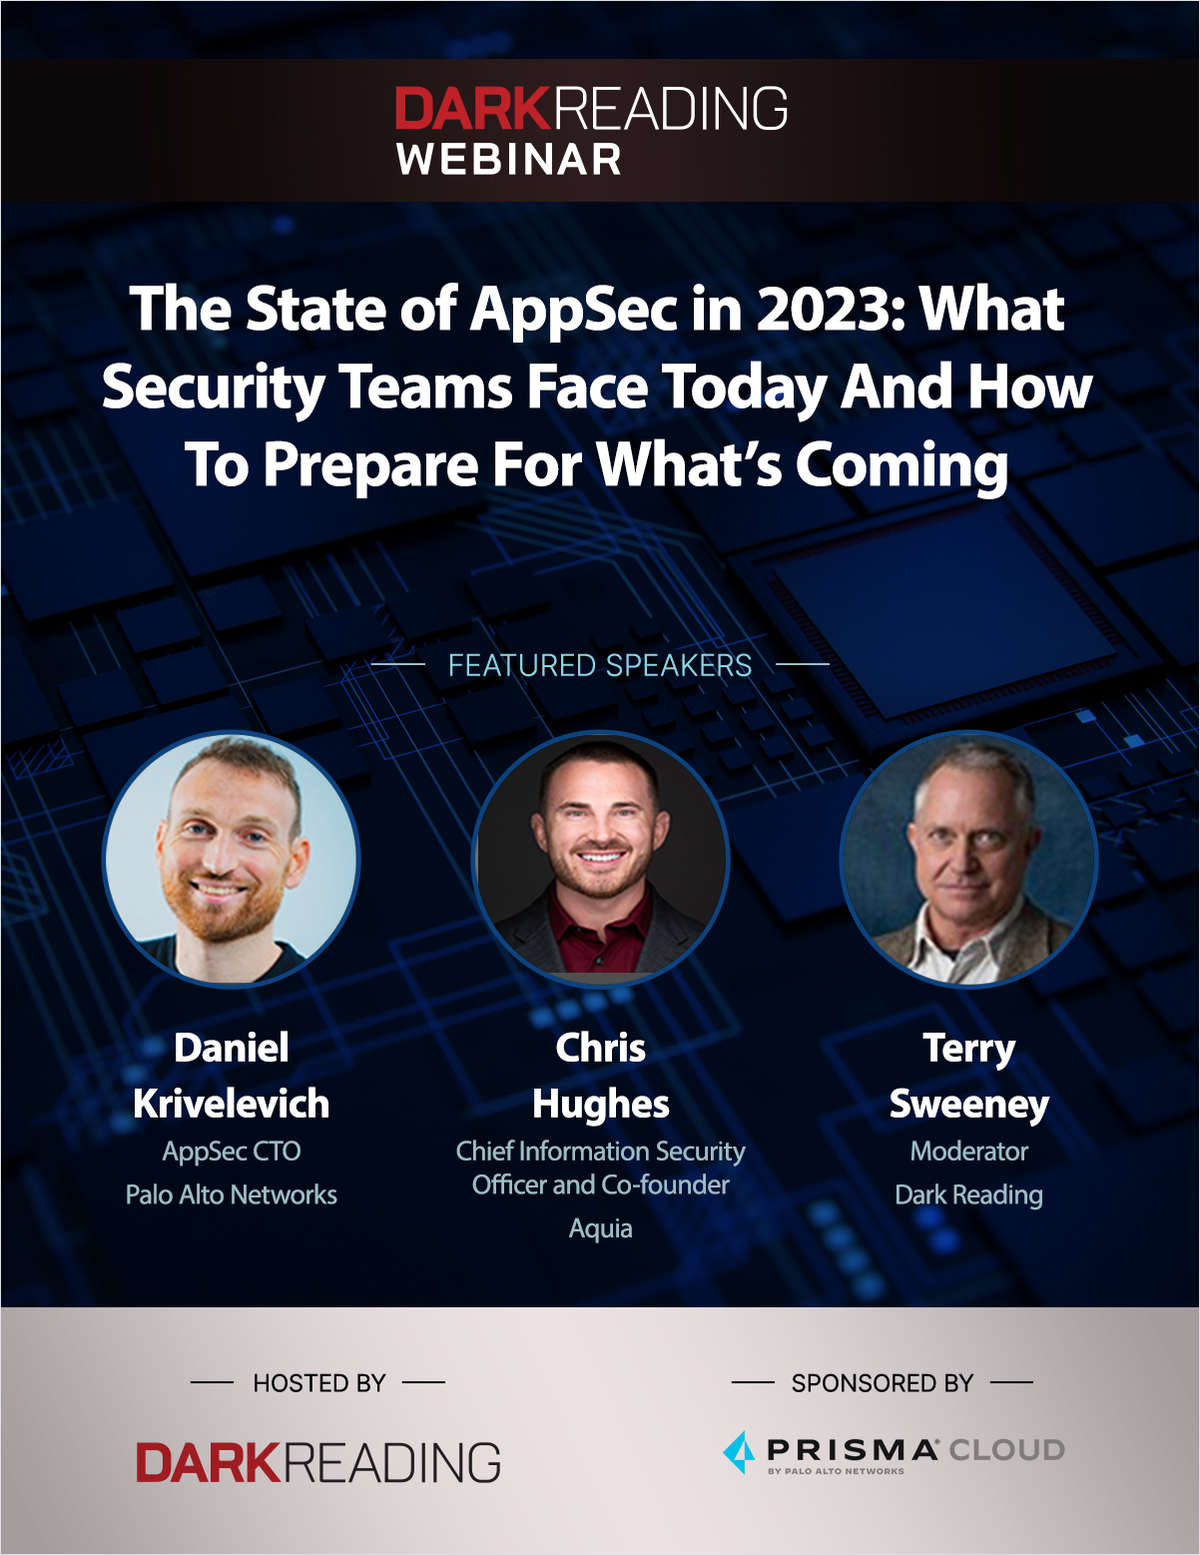 The State of AppSec in 2023: What Security Teams Face Today And How To Prepare For What's Coming